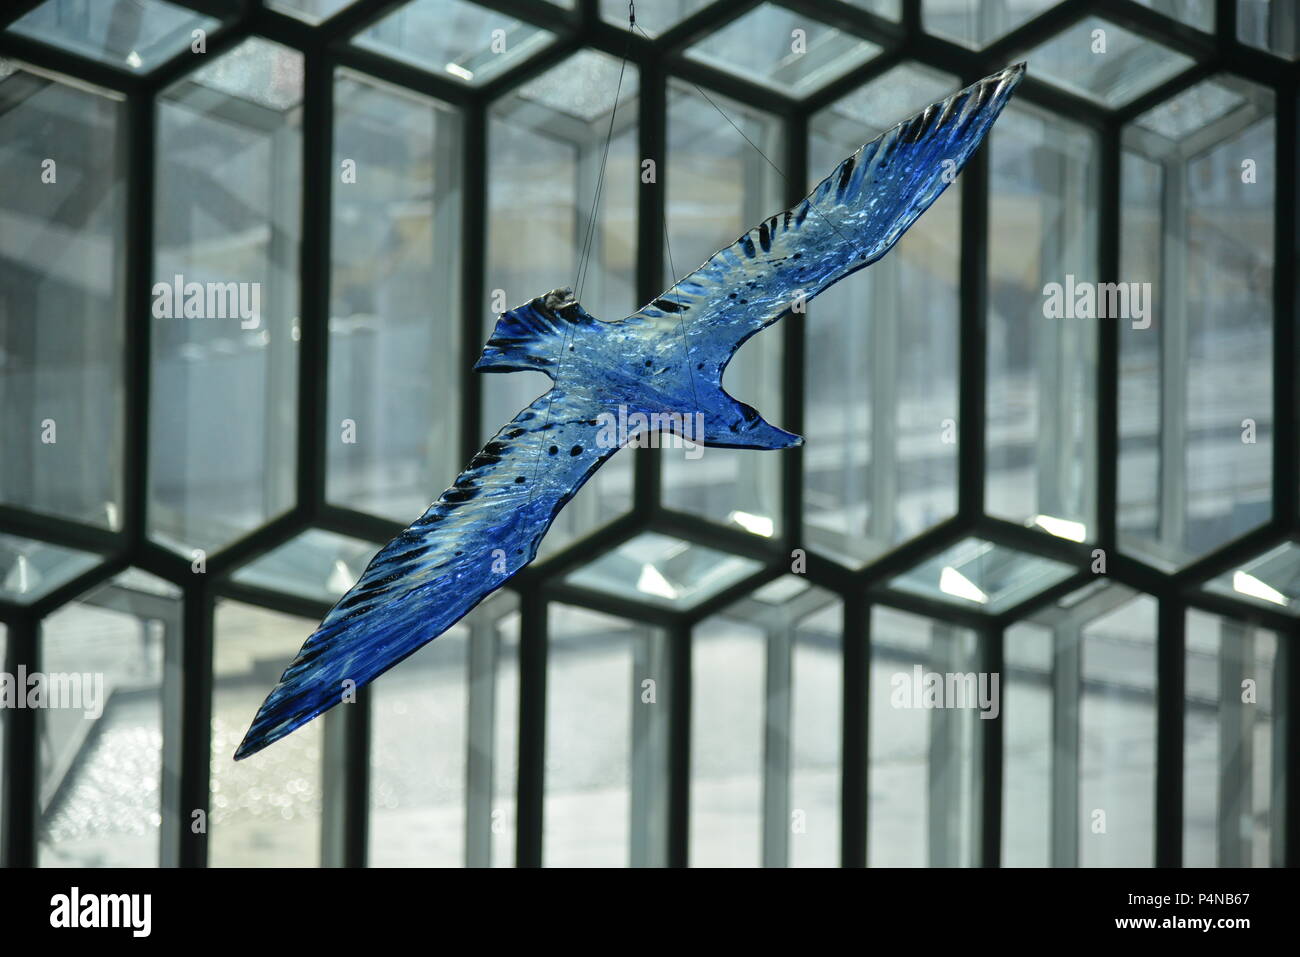 Blue glass bird flying through the interior of the famous Harpa concert hall in Reykjavik, Iceland Stock Photo